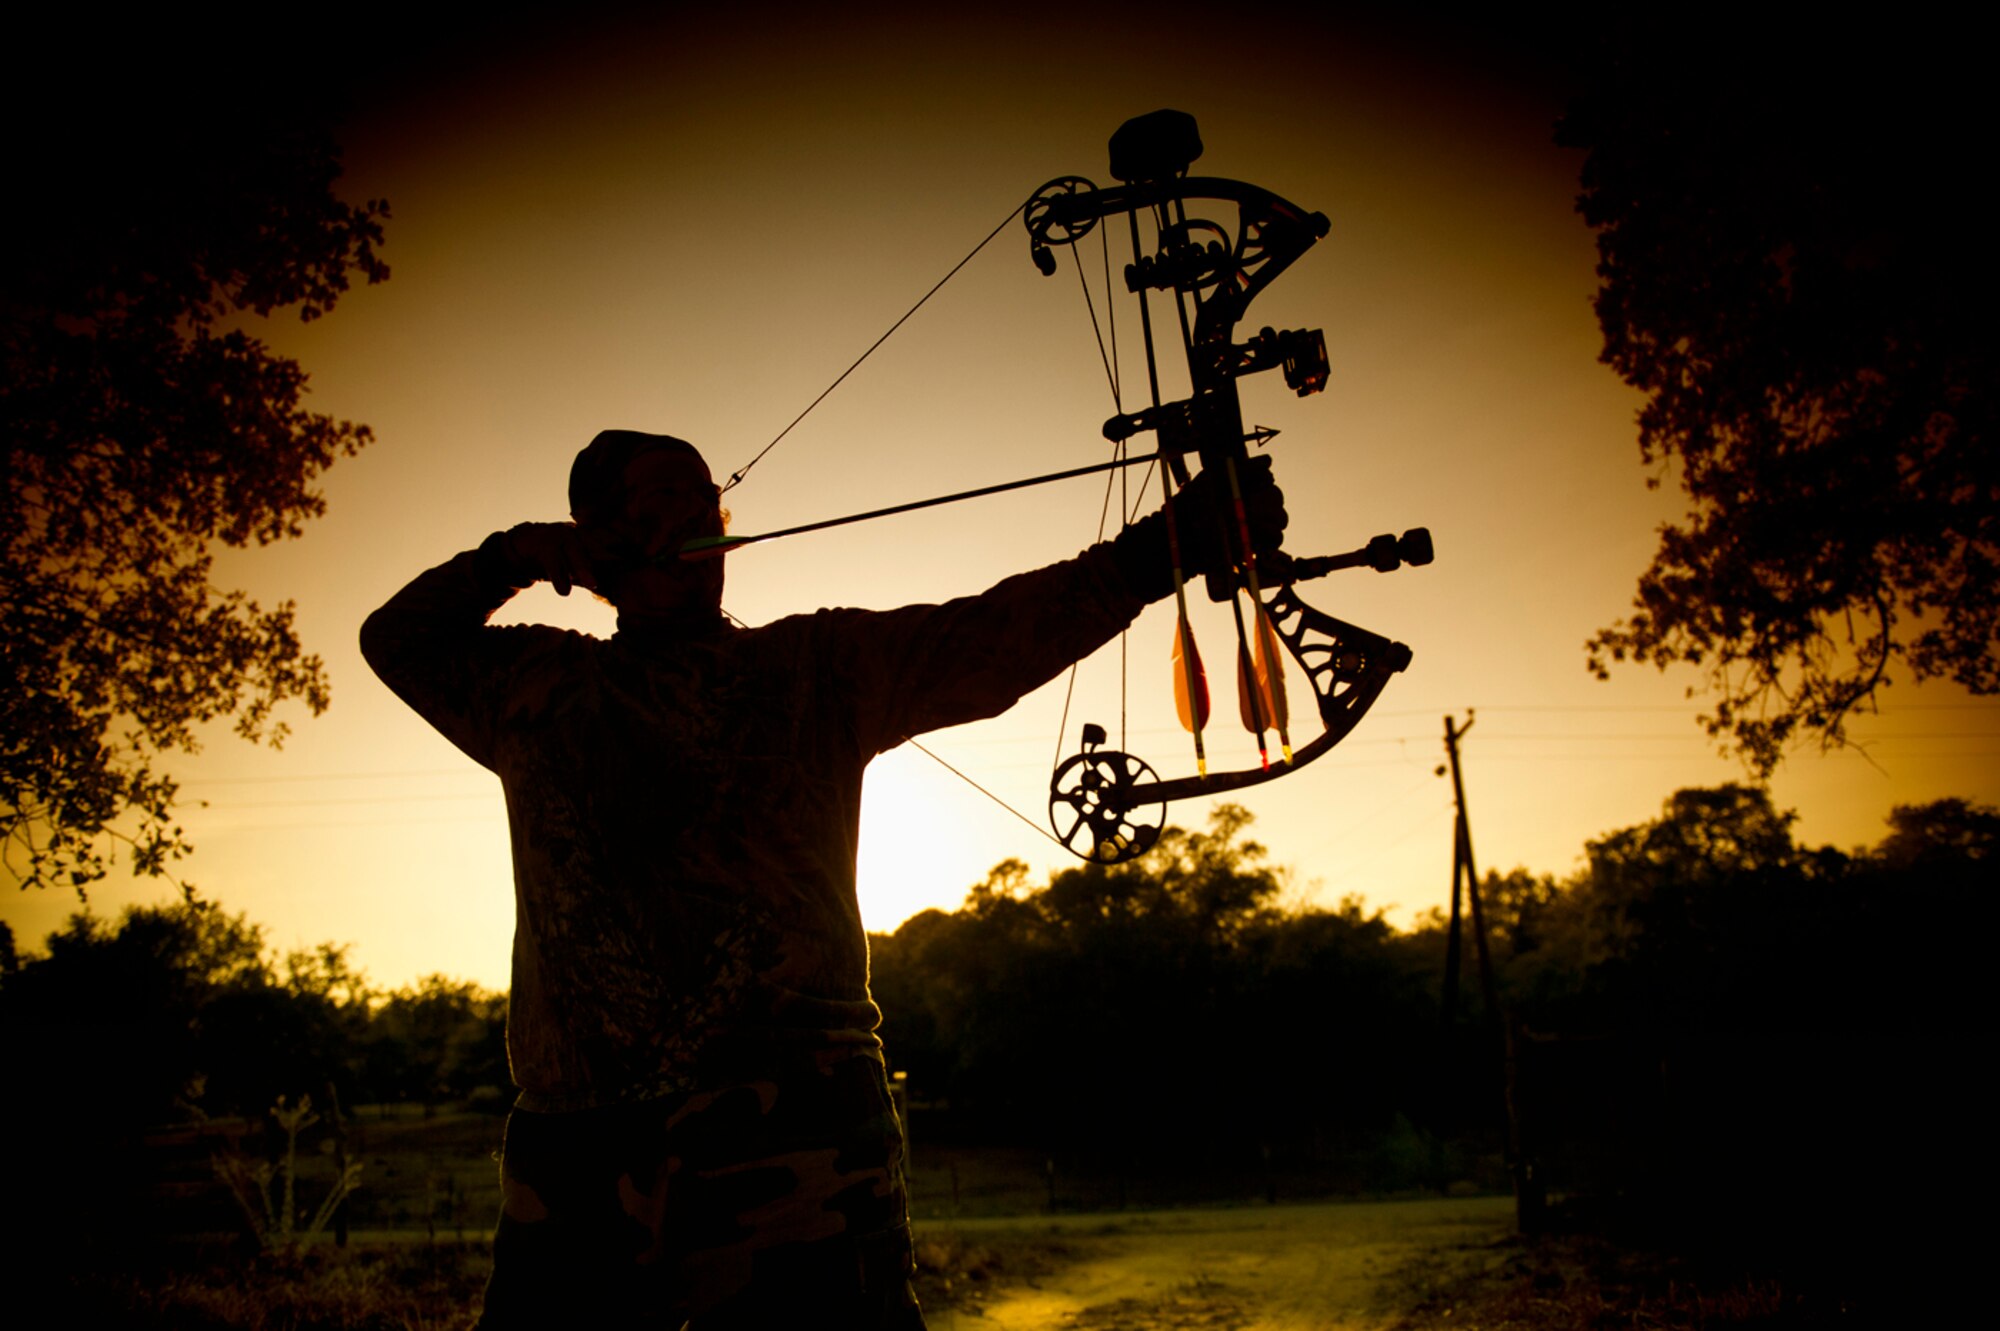 HEAD HUNTER - Call him Mr. October. It’s Curtis Hahn’s favorite month of the year because it marks the start of deer hunting season and time for him to take aim with his beloved bow and arrows. (Photo by Tech. Sgt. Samuel Bendet)